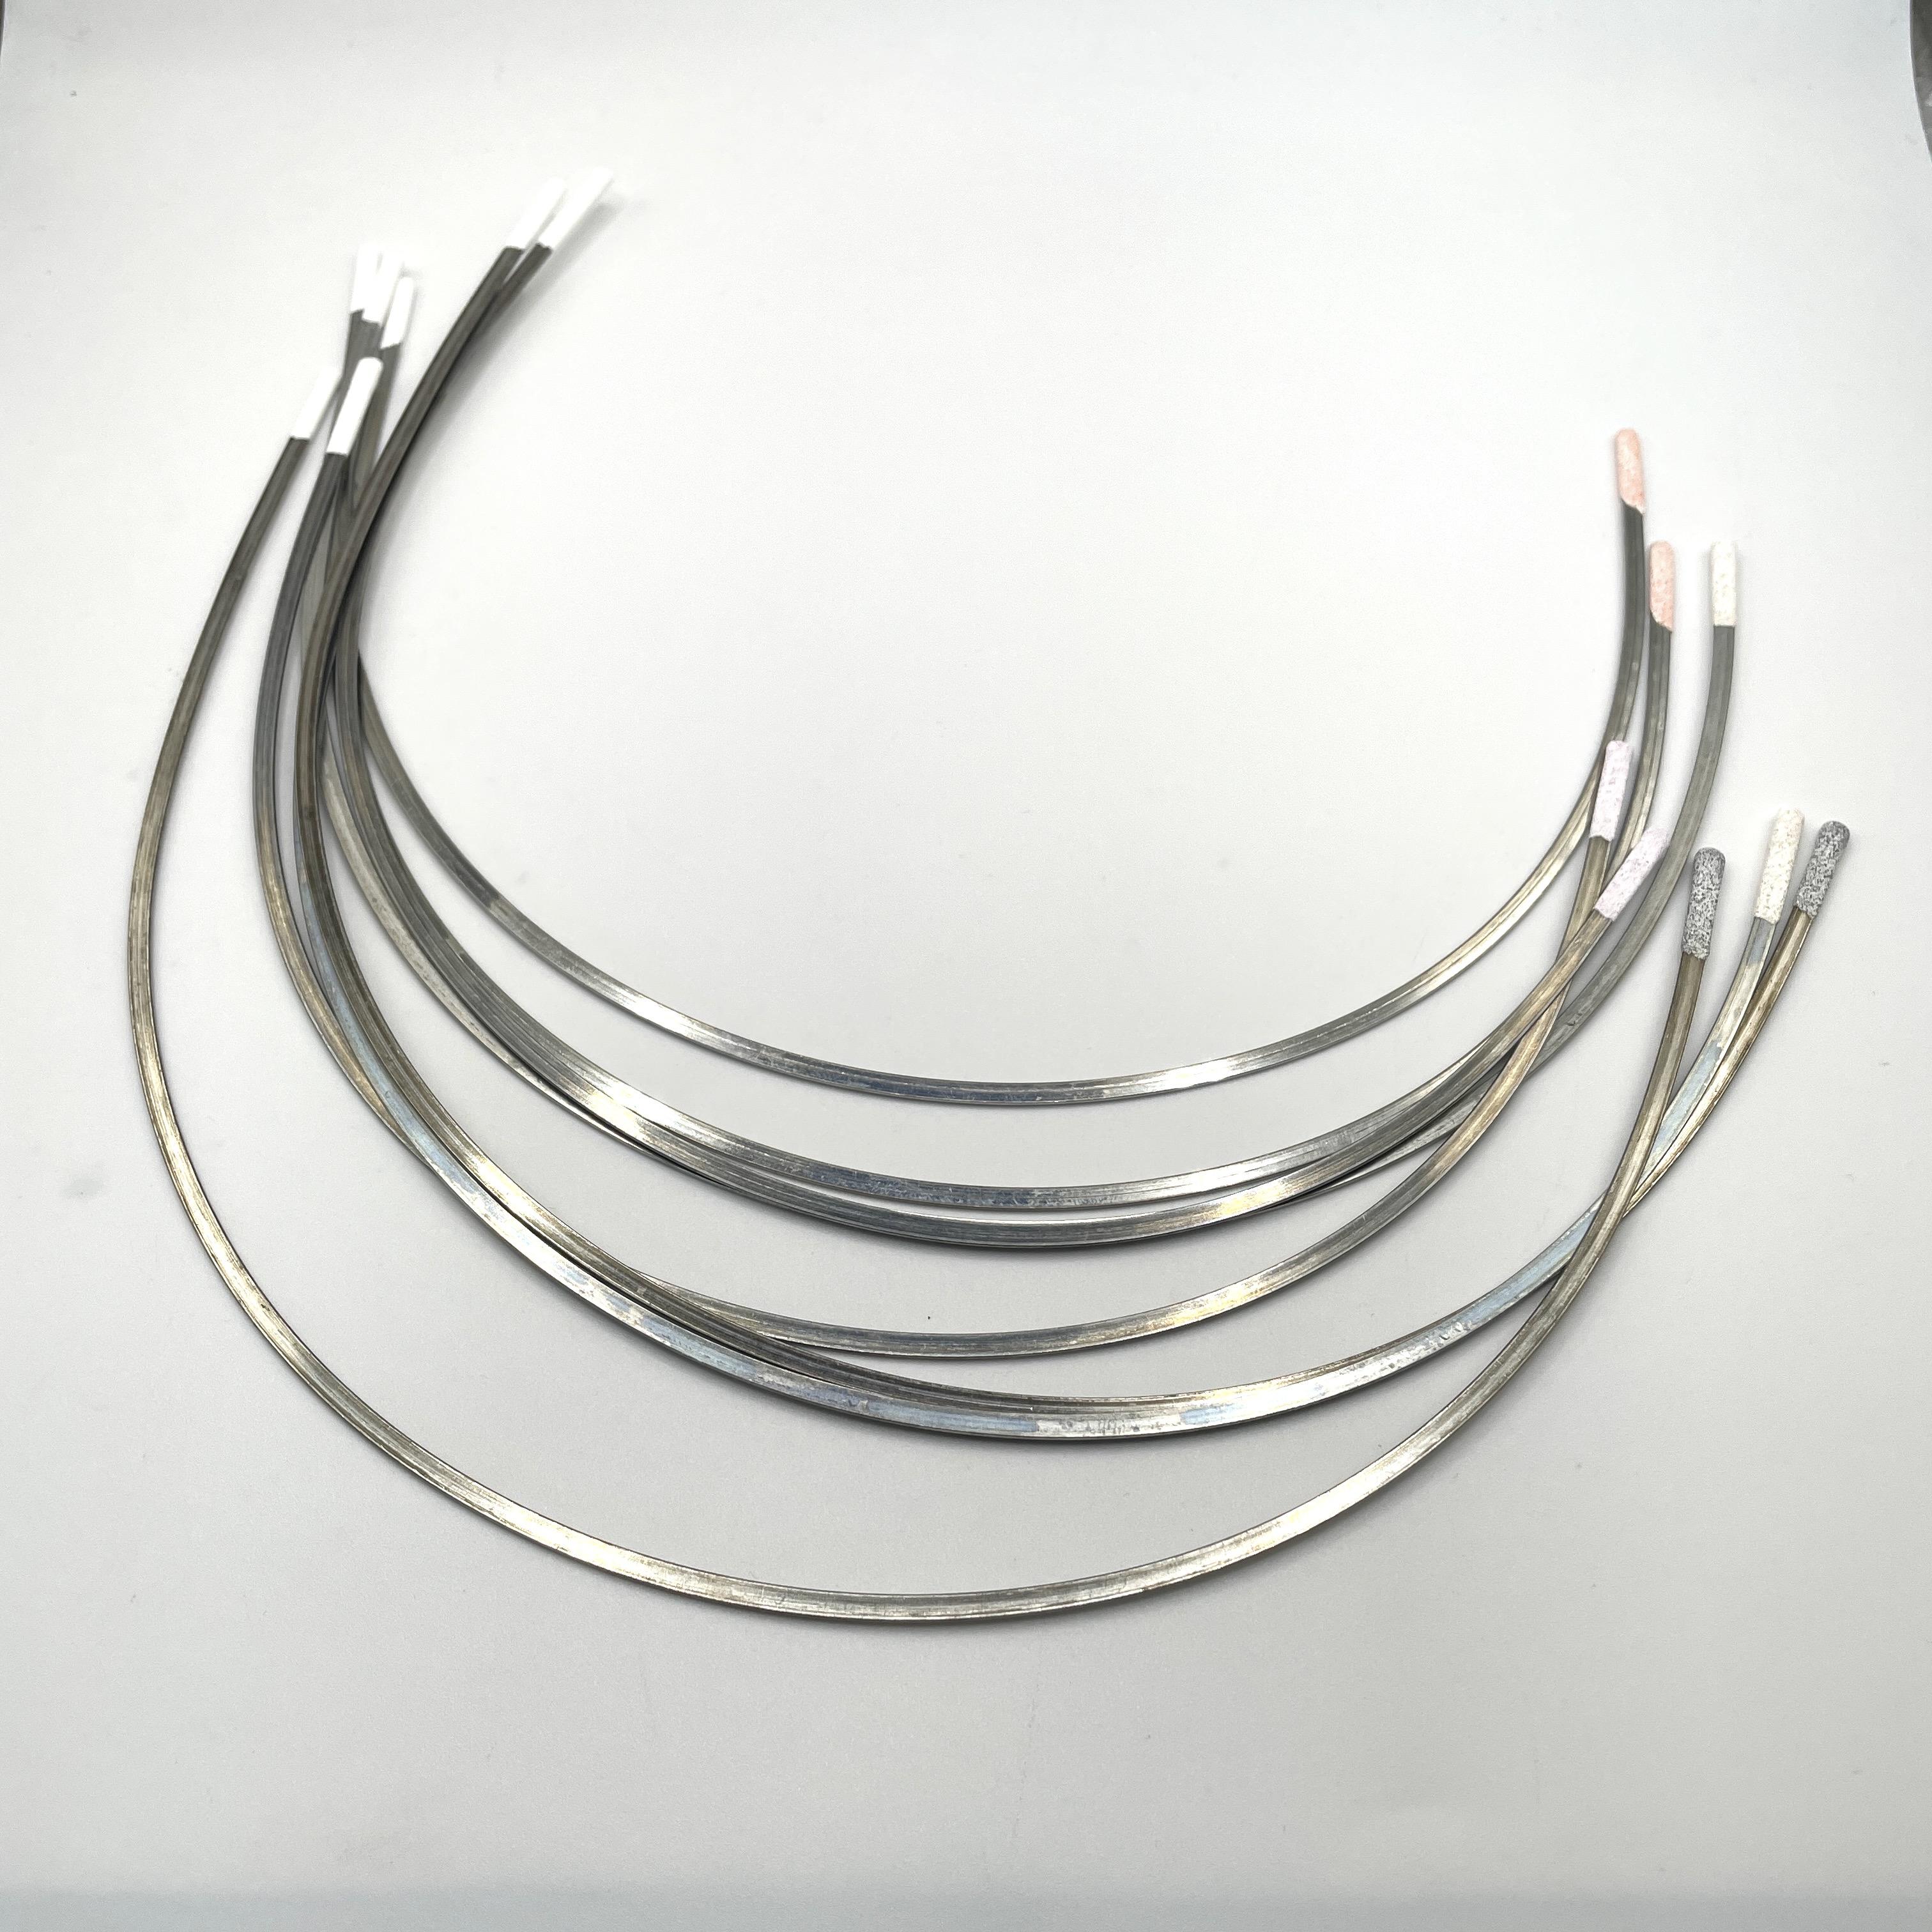 Bra Wires - Stainless steel with coated tips - style 992 (Wide